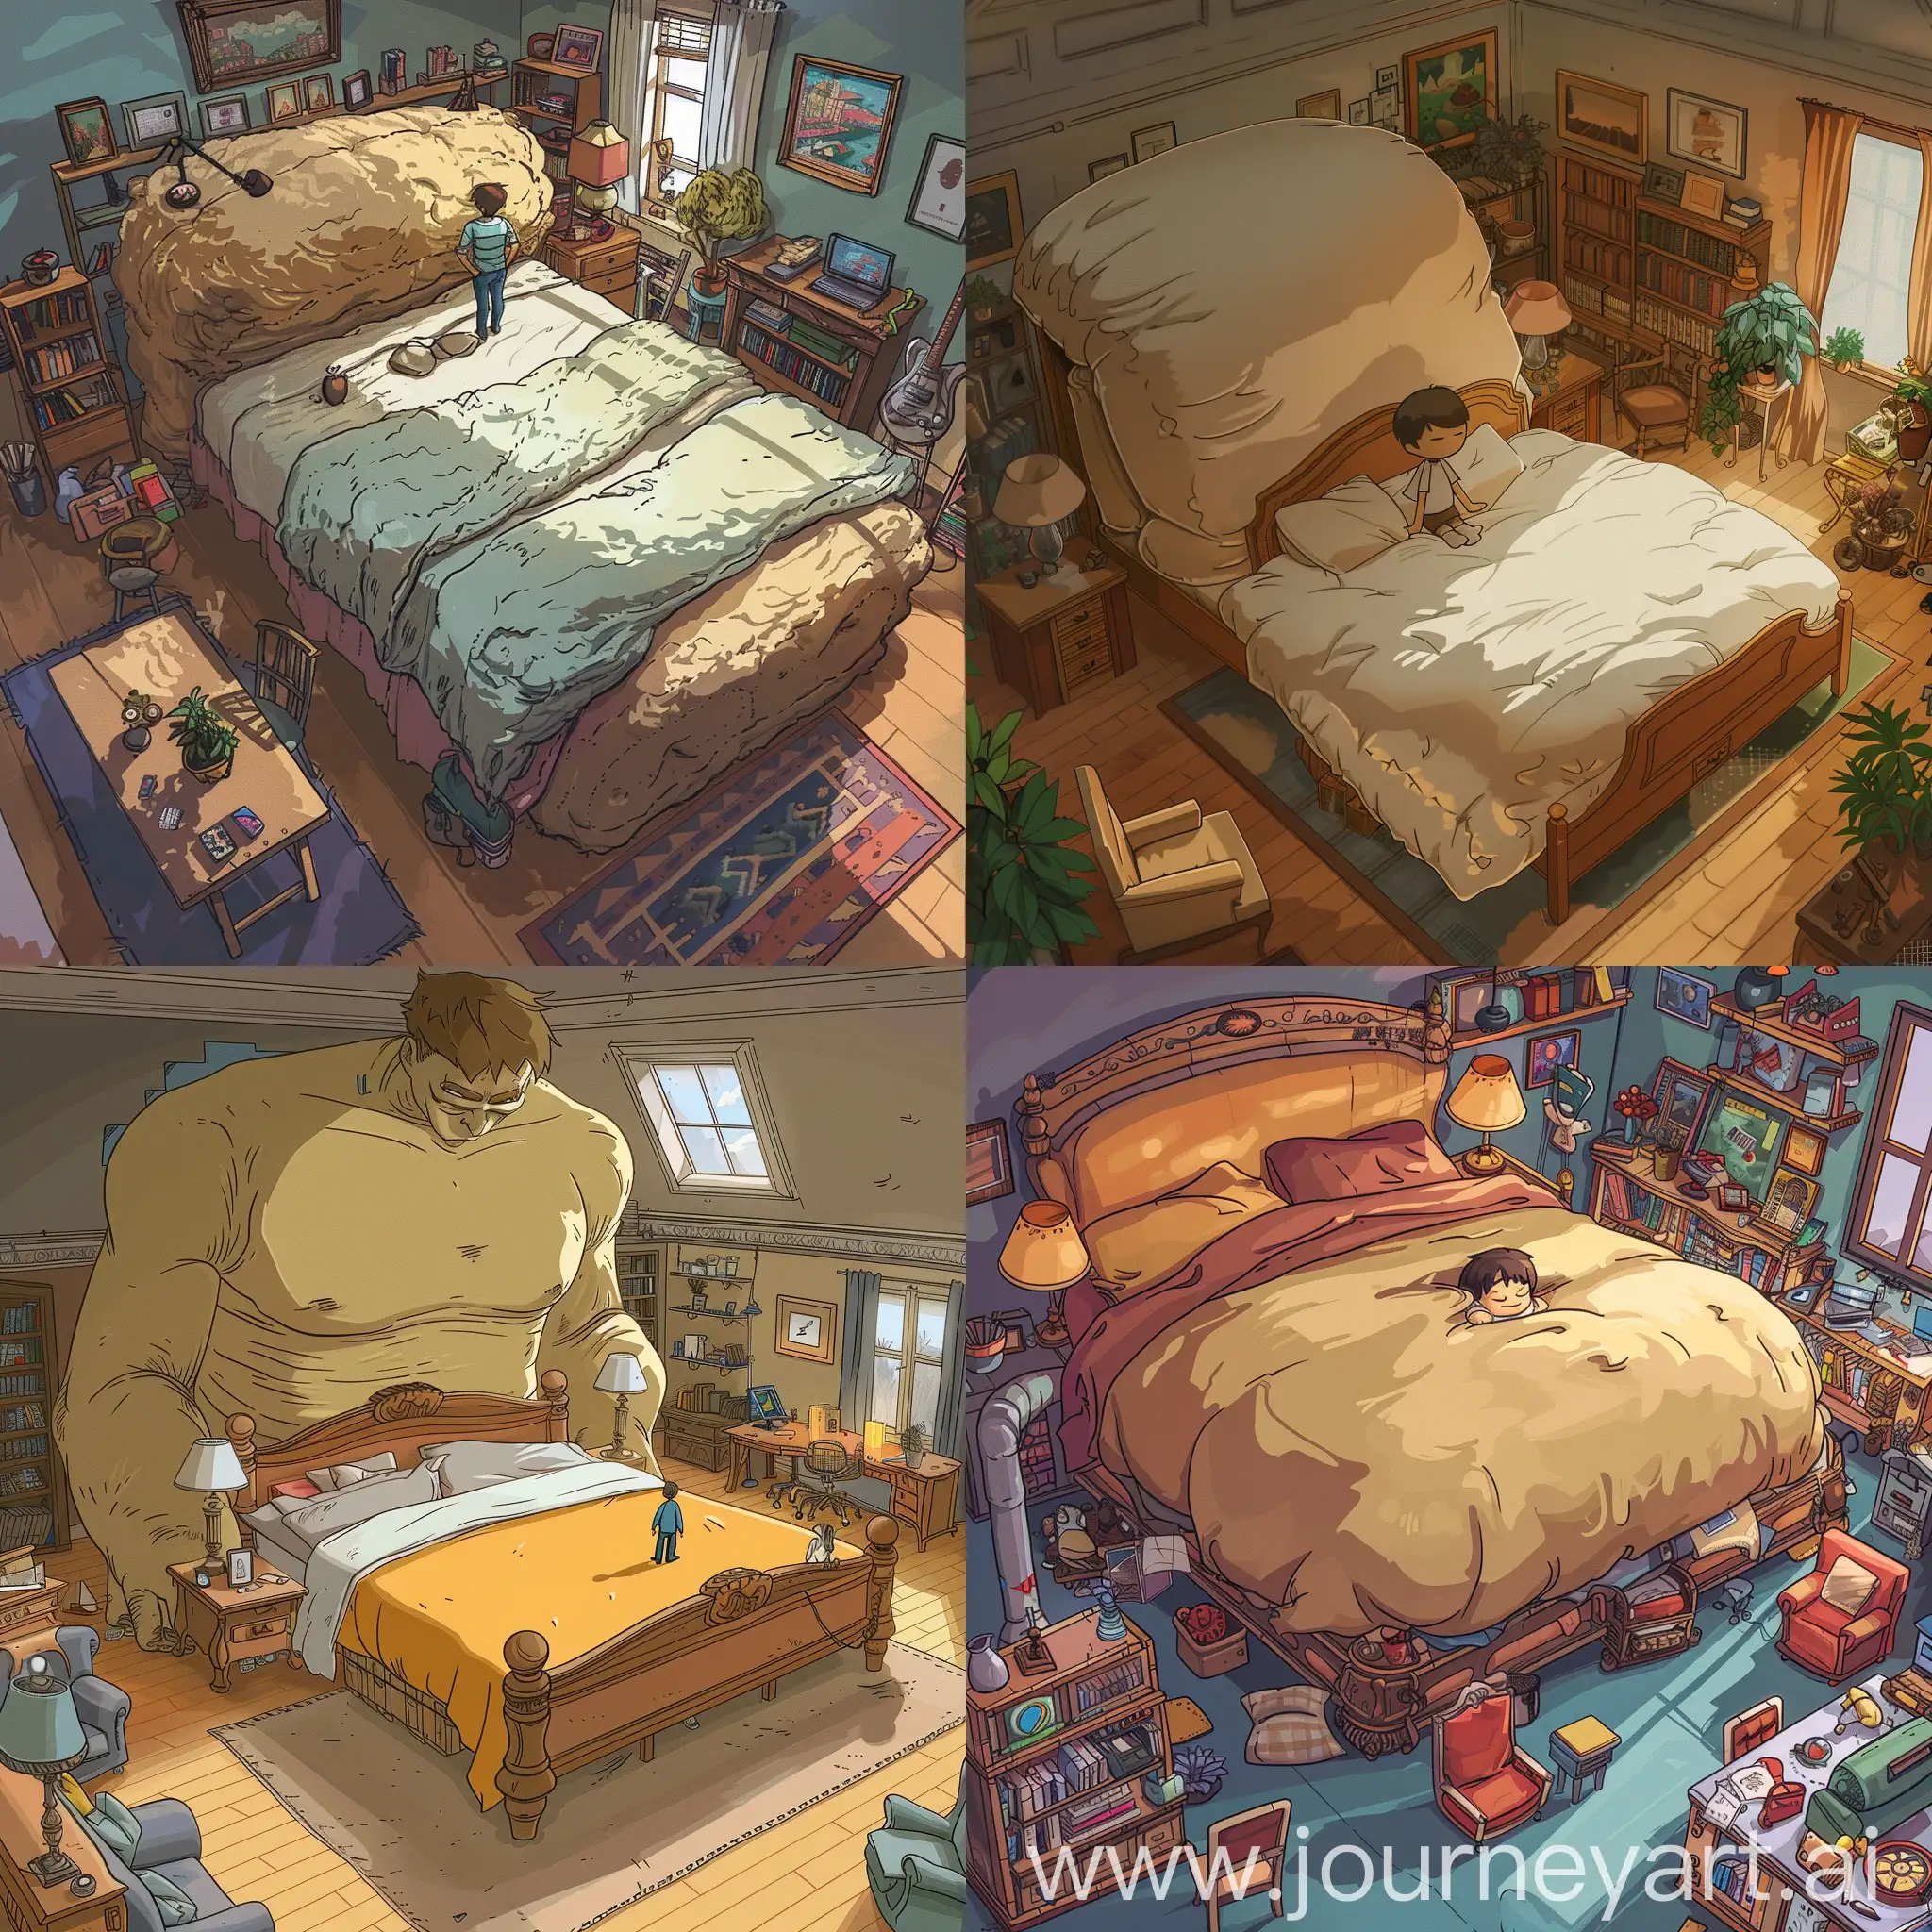 Protagonist-Waking-Up-in-a-Giant-Room